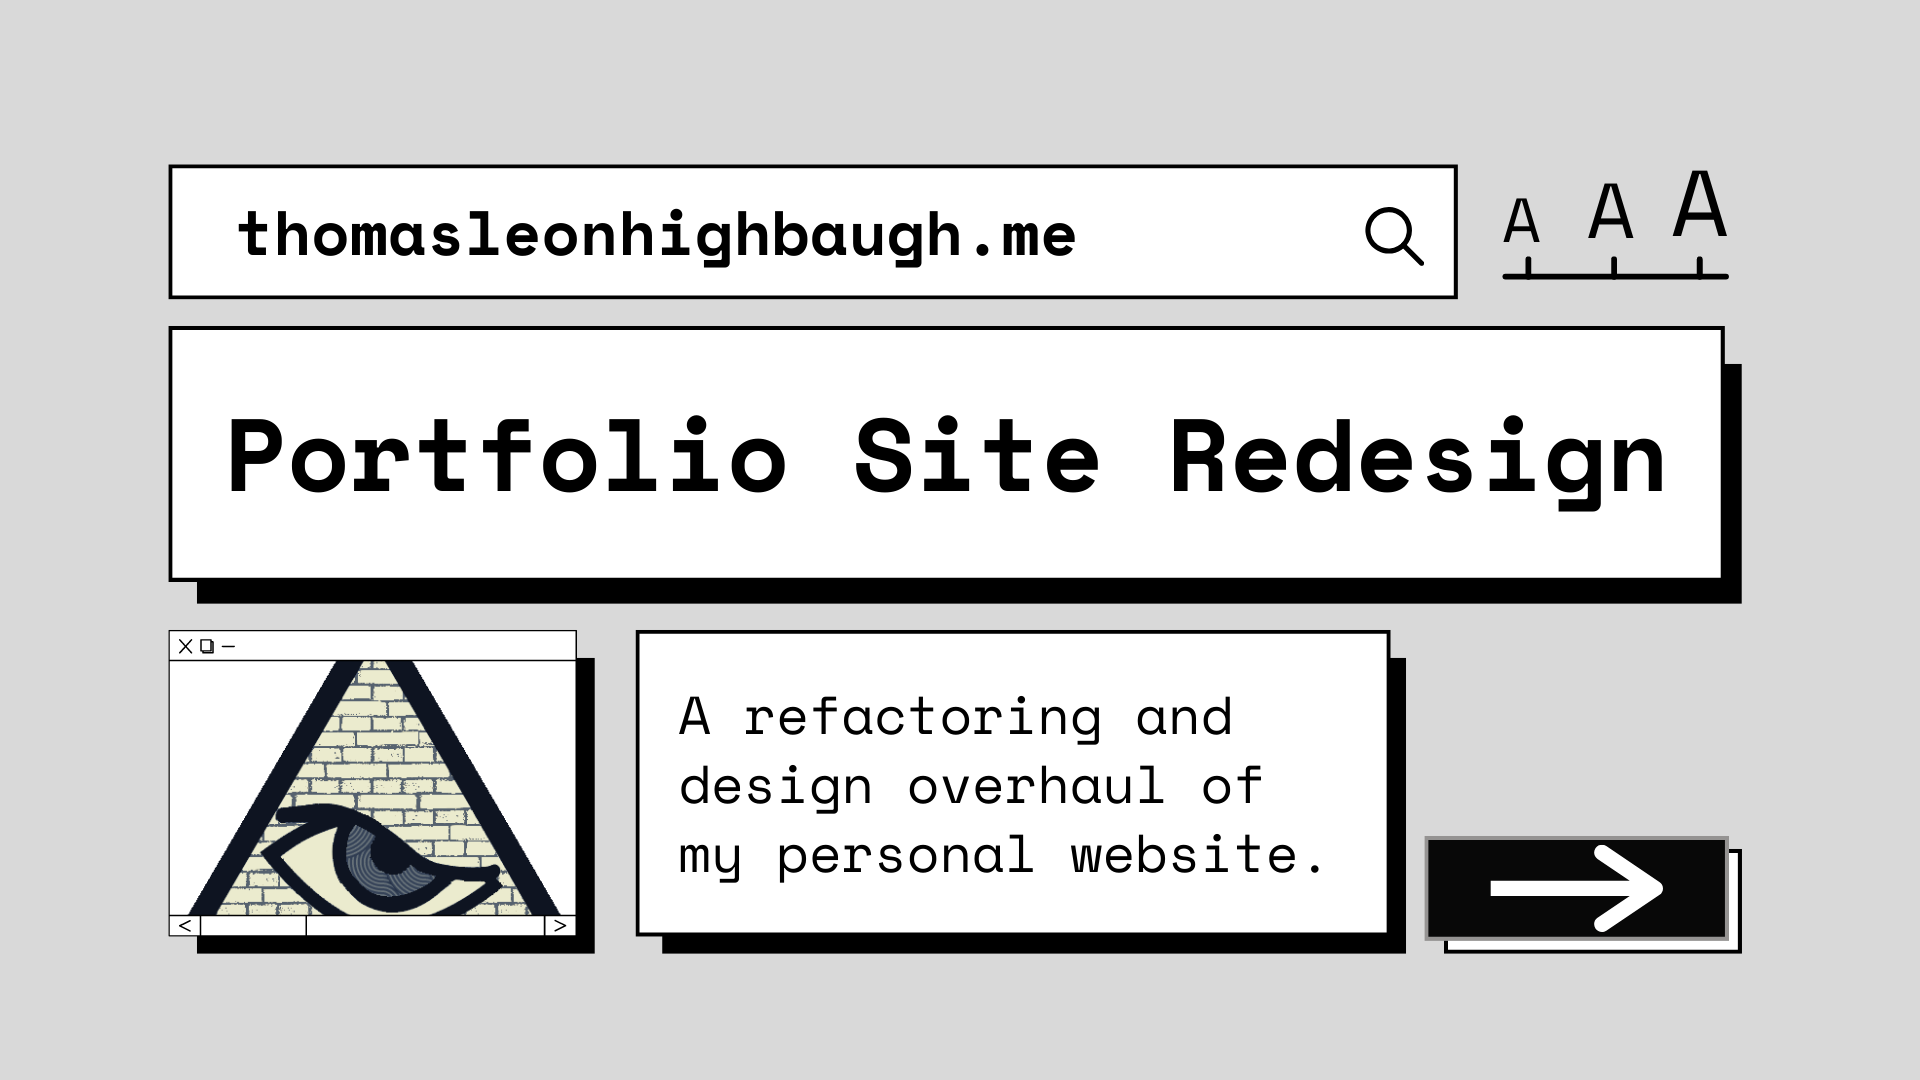 A banner announcing the portfolio site's redesign